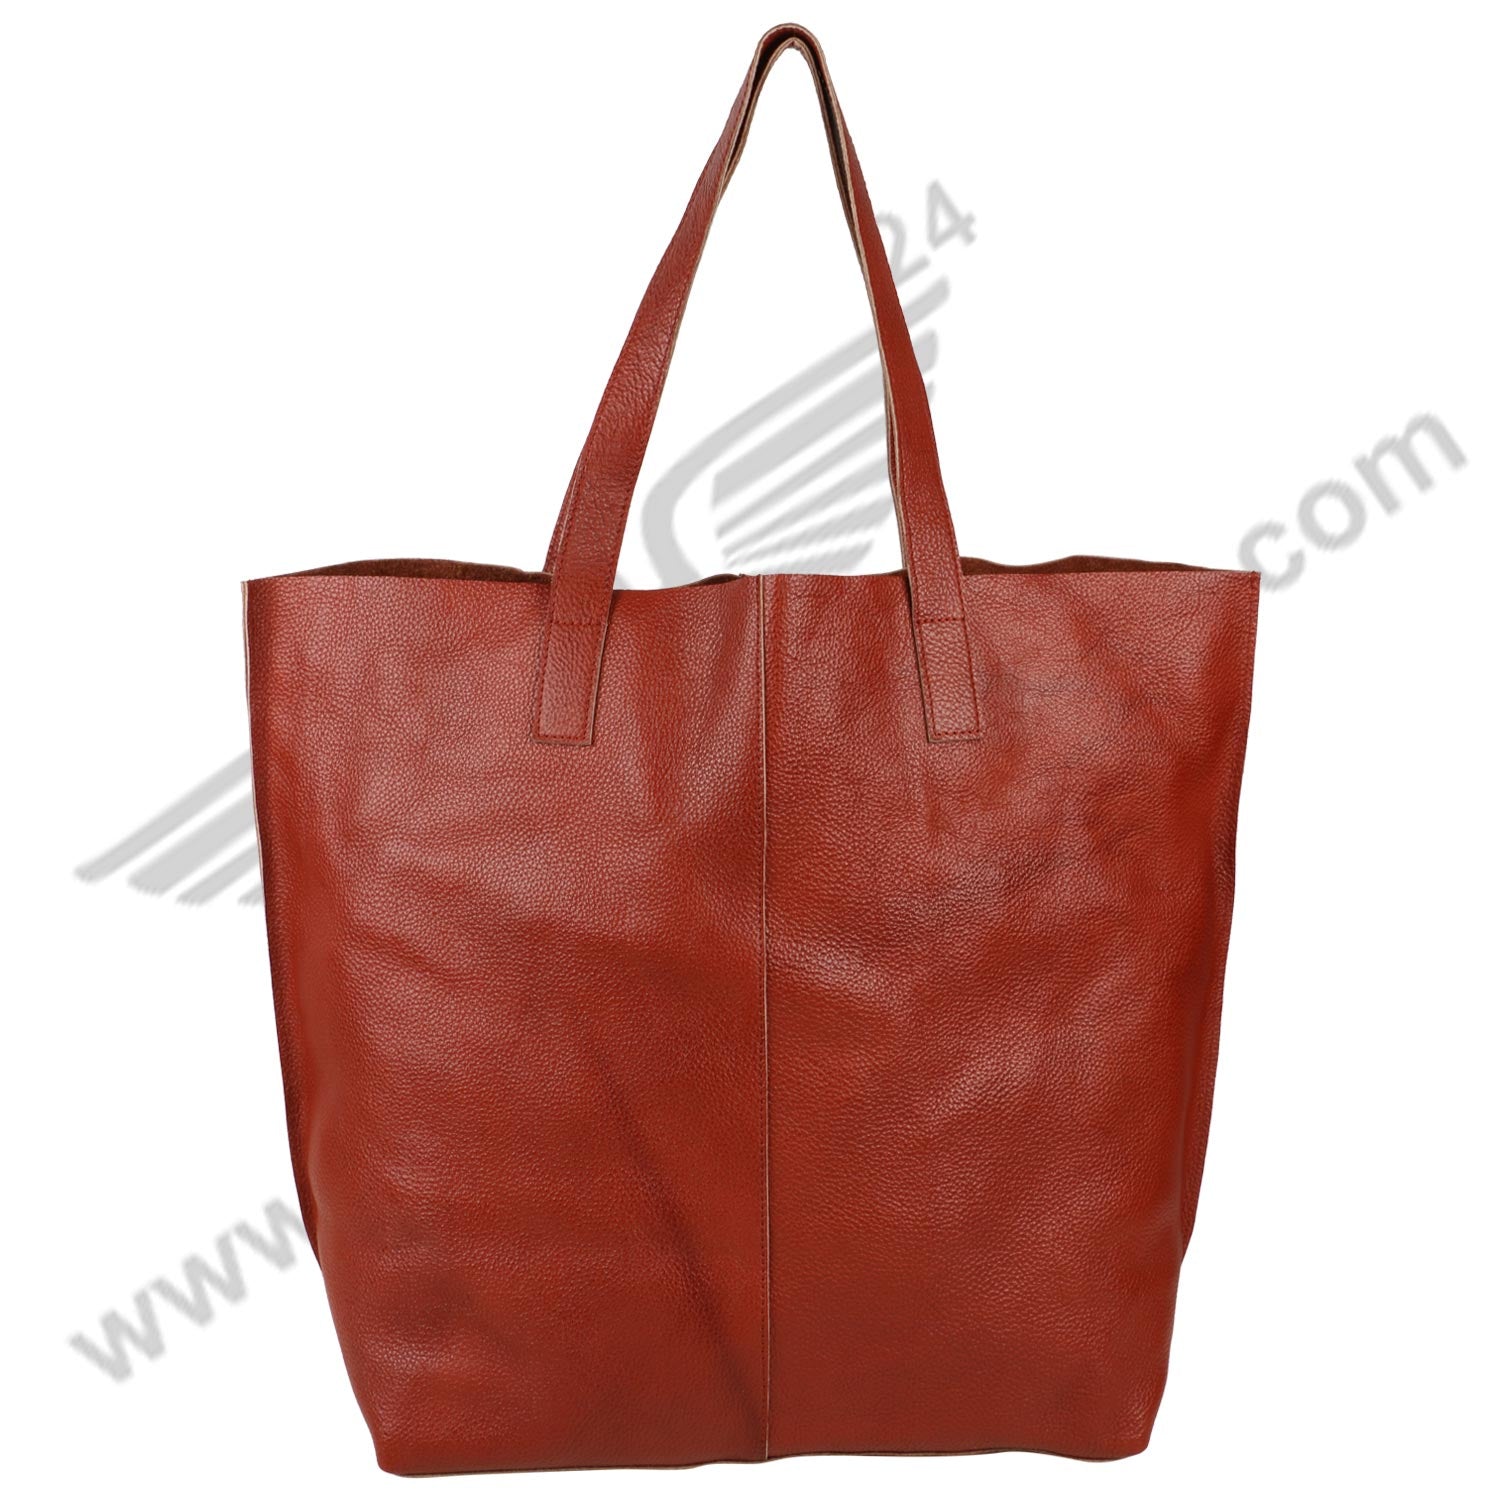 Front image of brown LUFT SHOPPING BAG. The handle of bag is upright.